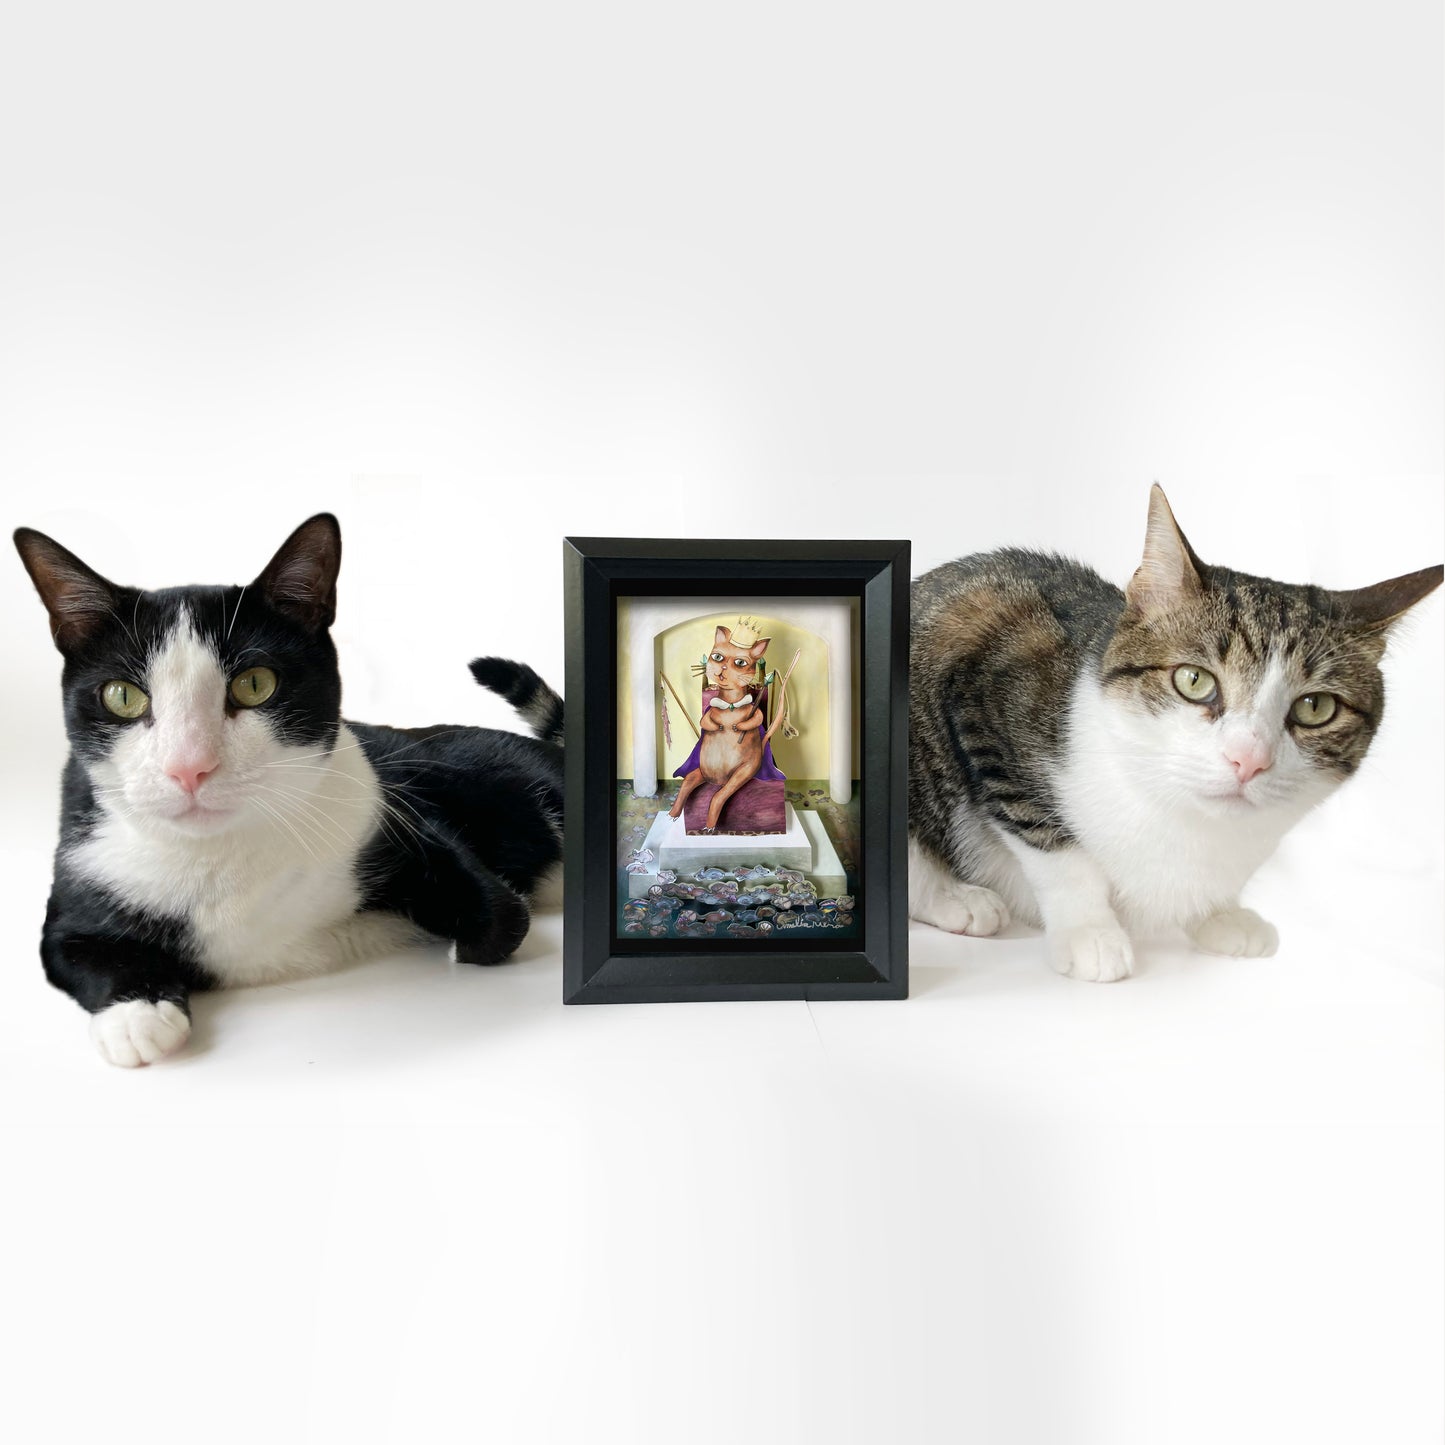 King of Cats - Limited Edition Shadow Box Wall Art